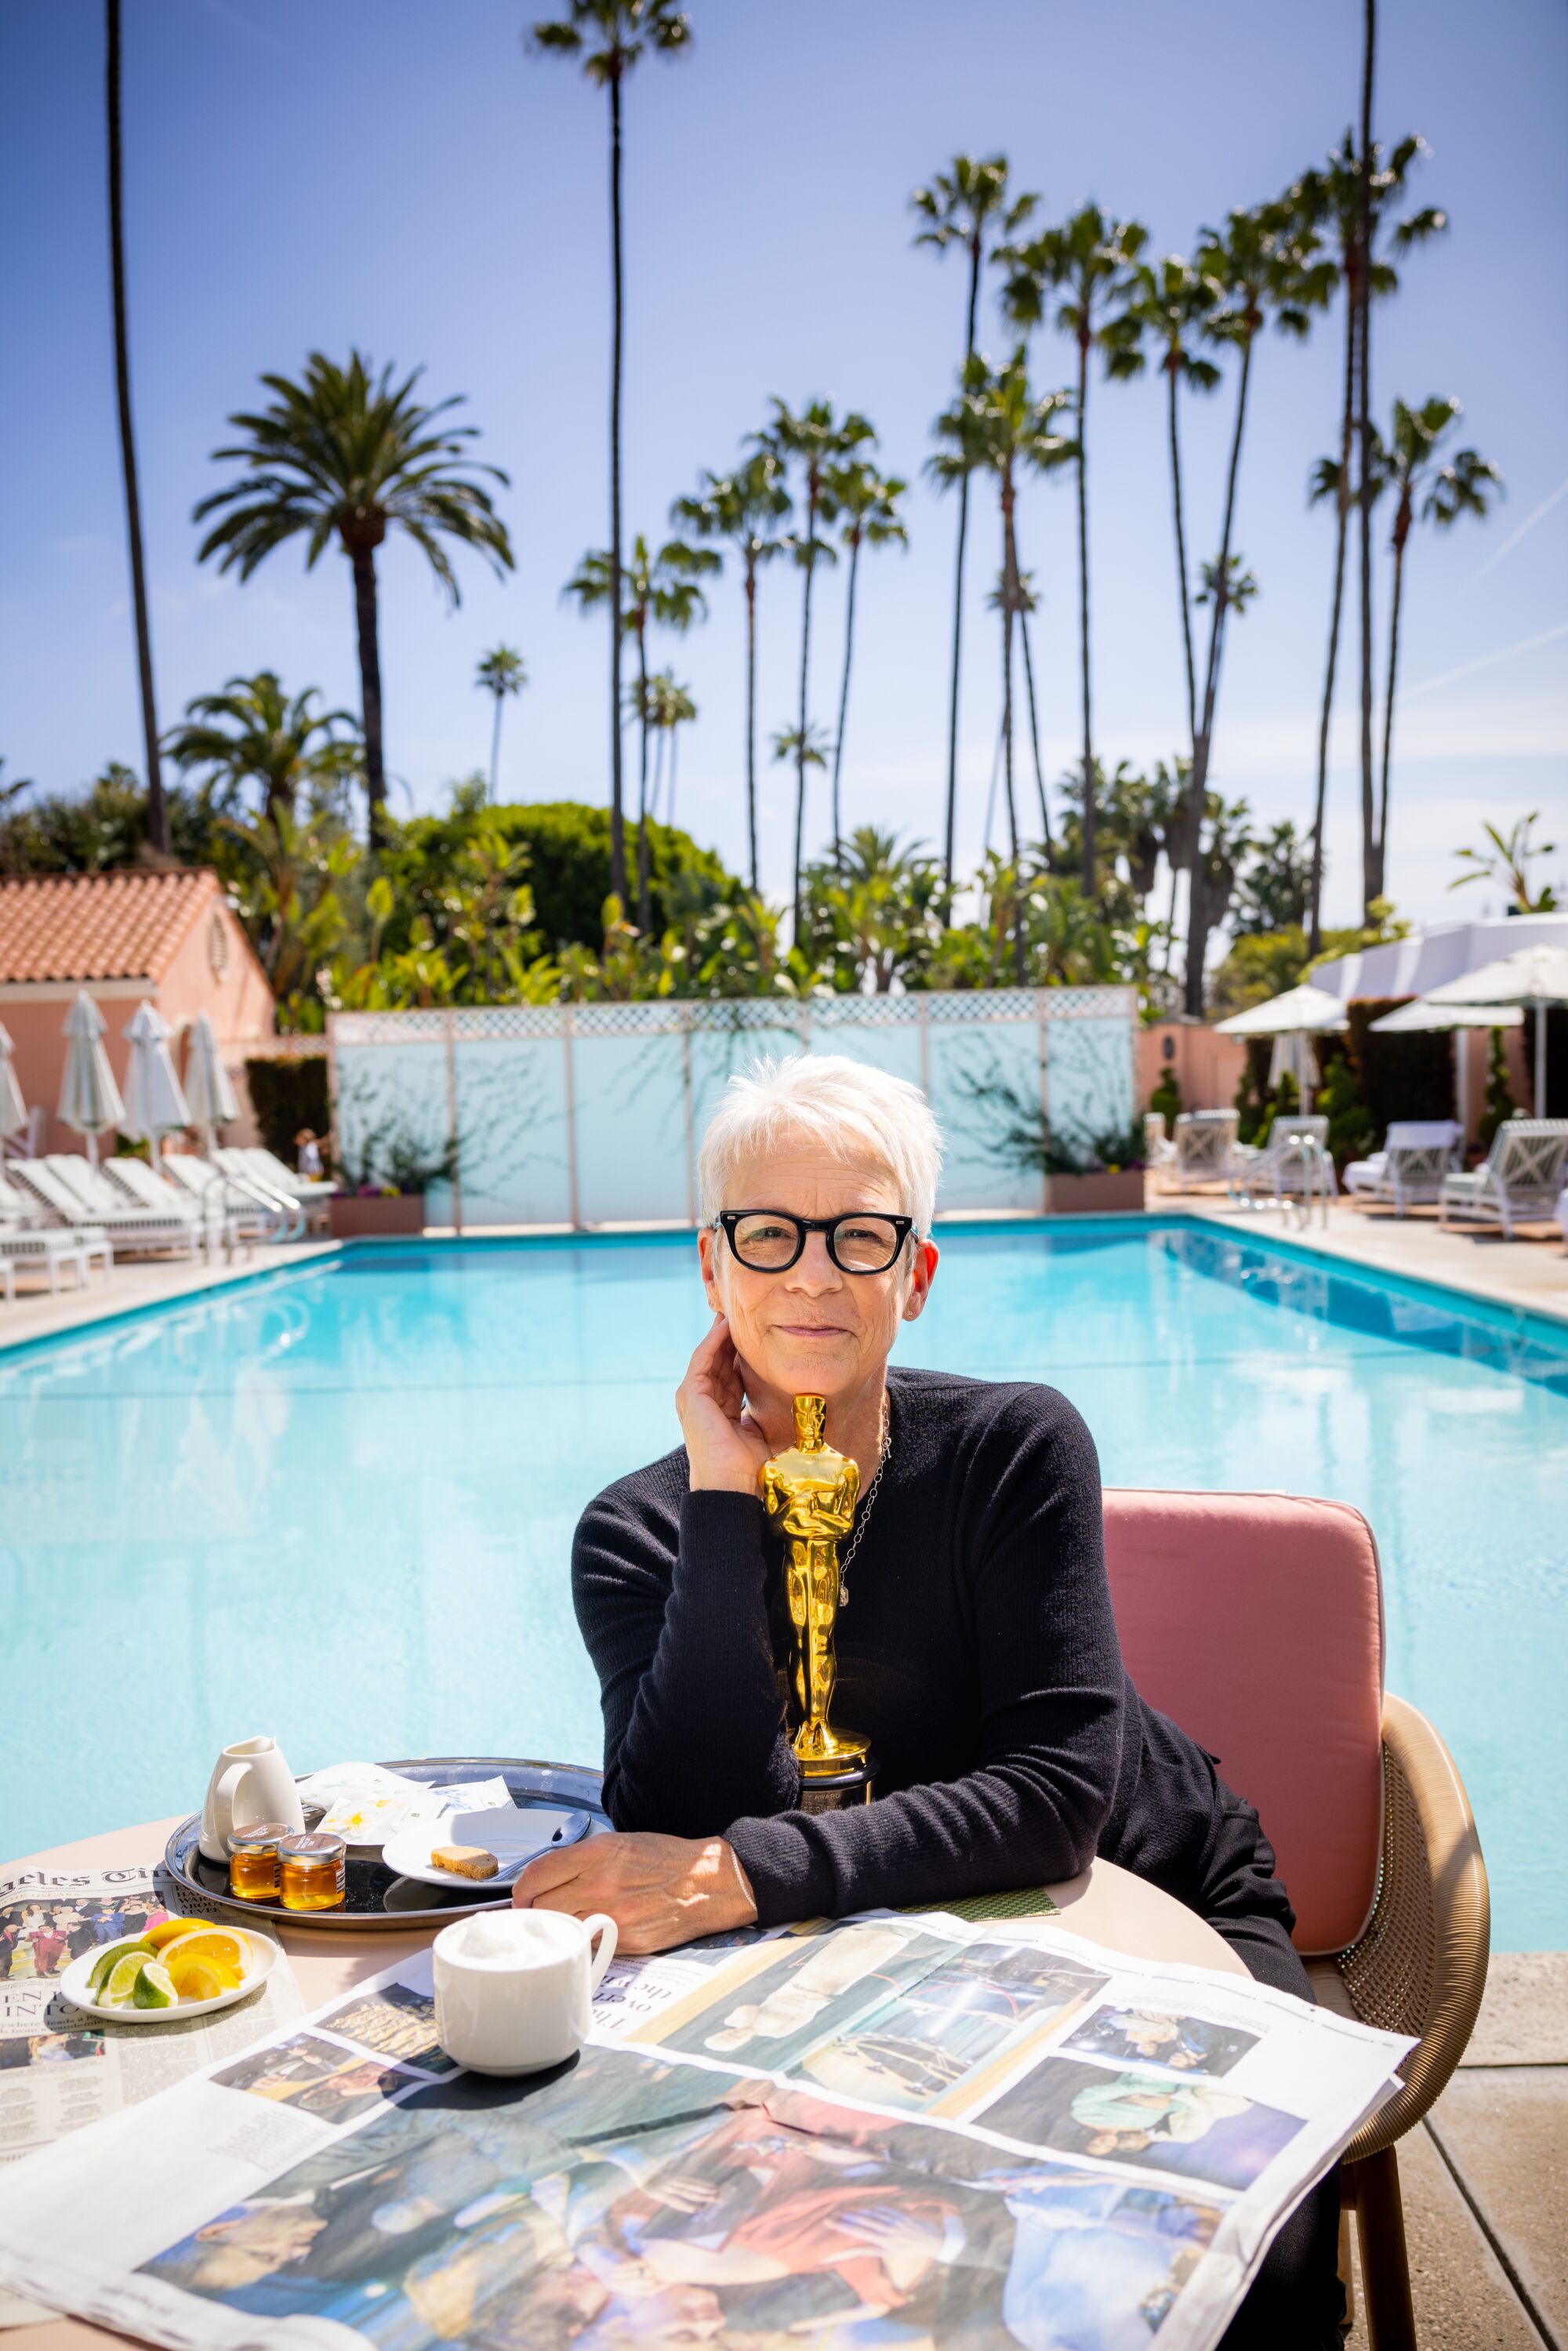 A smiling woman in glasses and a black sweater holds her Oscar trophy in front of a swimming pool.